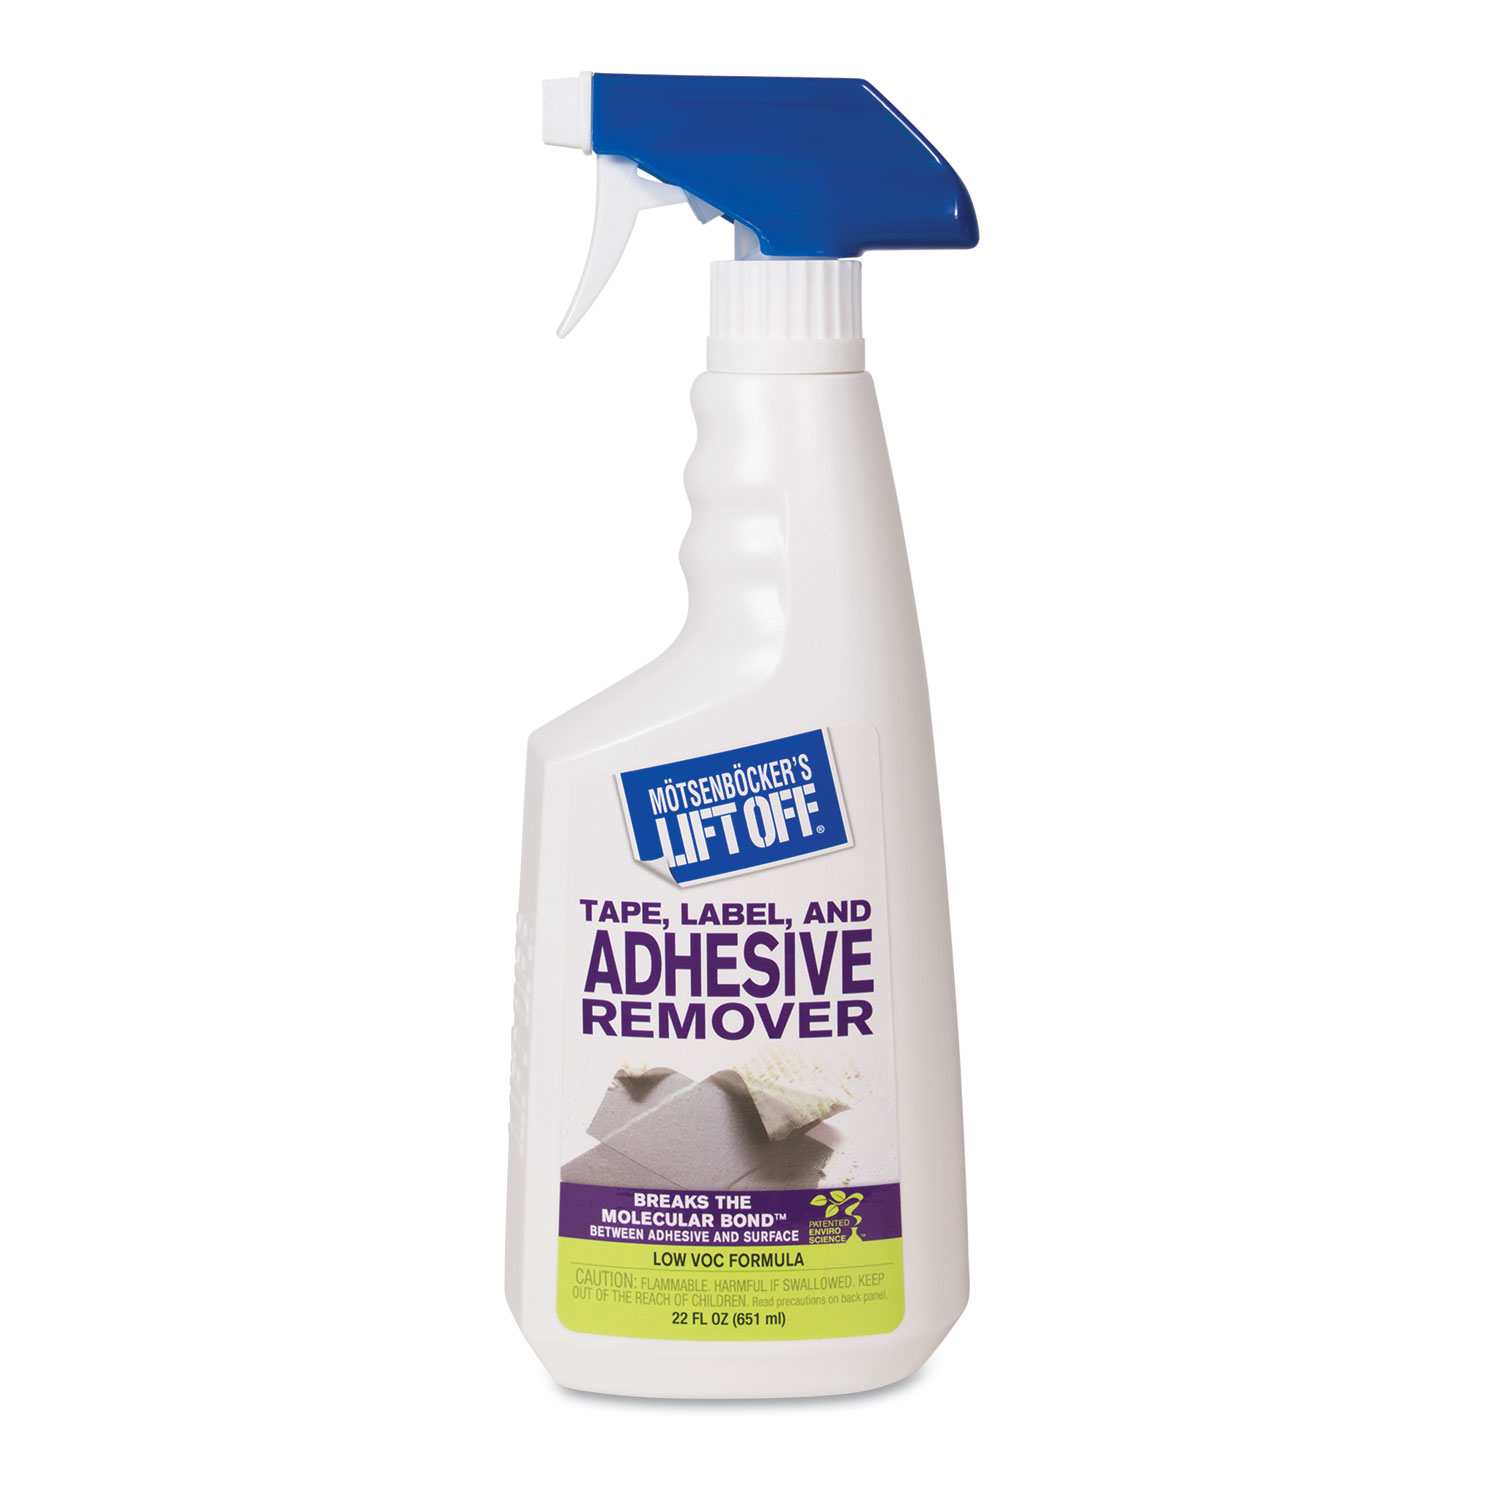 No. 2 Adhesive/Grease Stain Remover, 22oz Trigger Spray